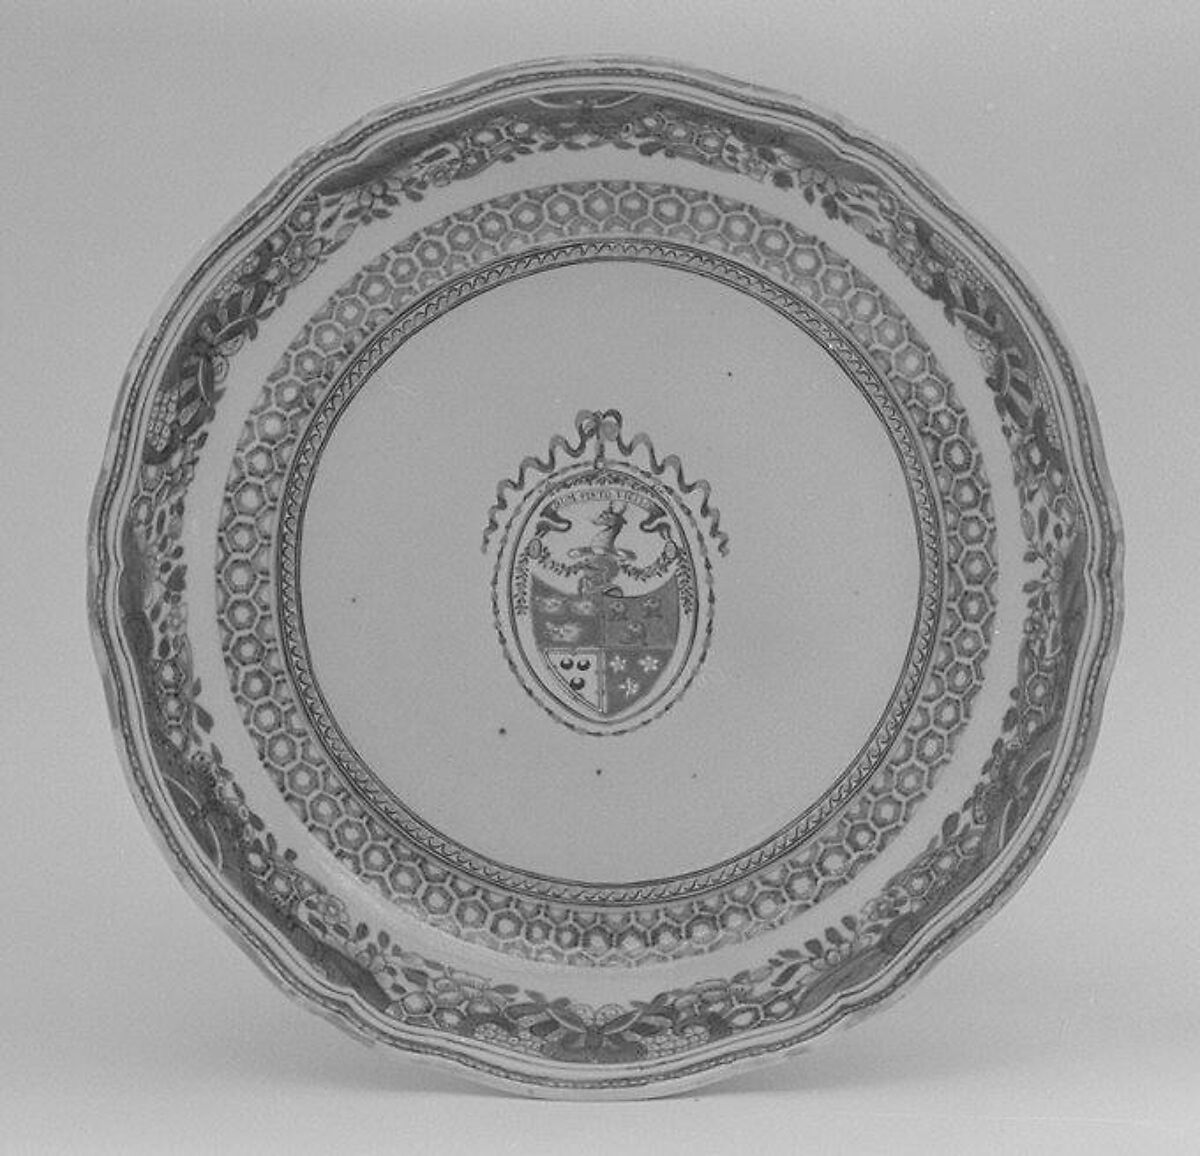 Deep dish (part of a service), Hard-paste porcelain, Chinese, for British market 